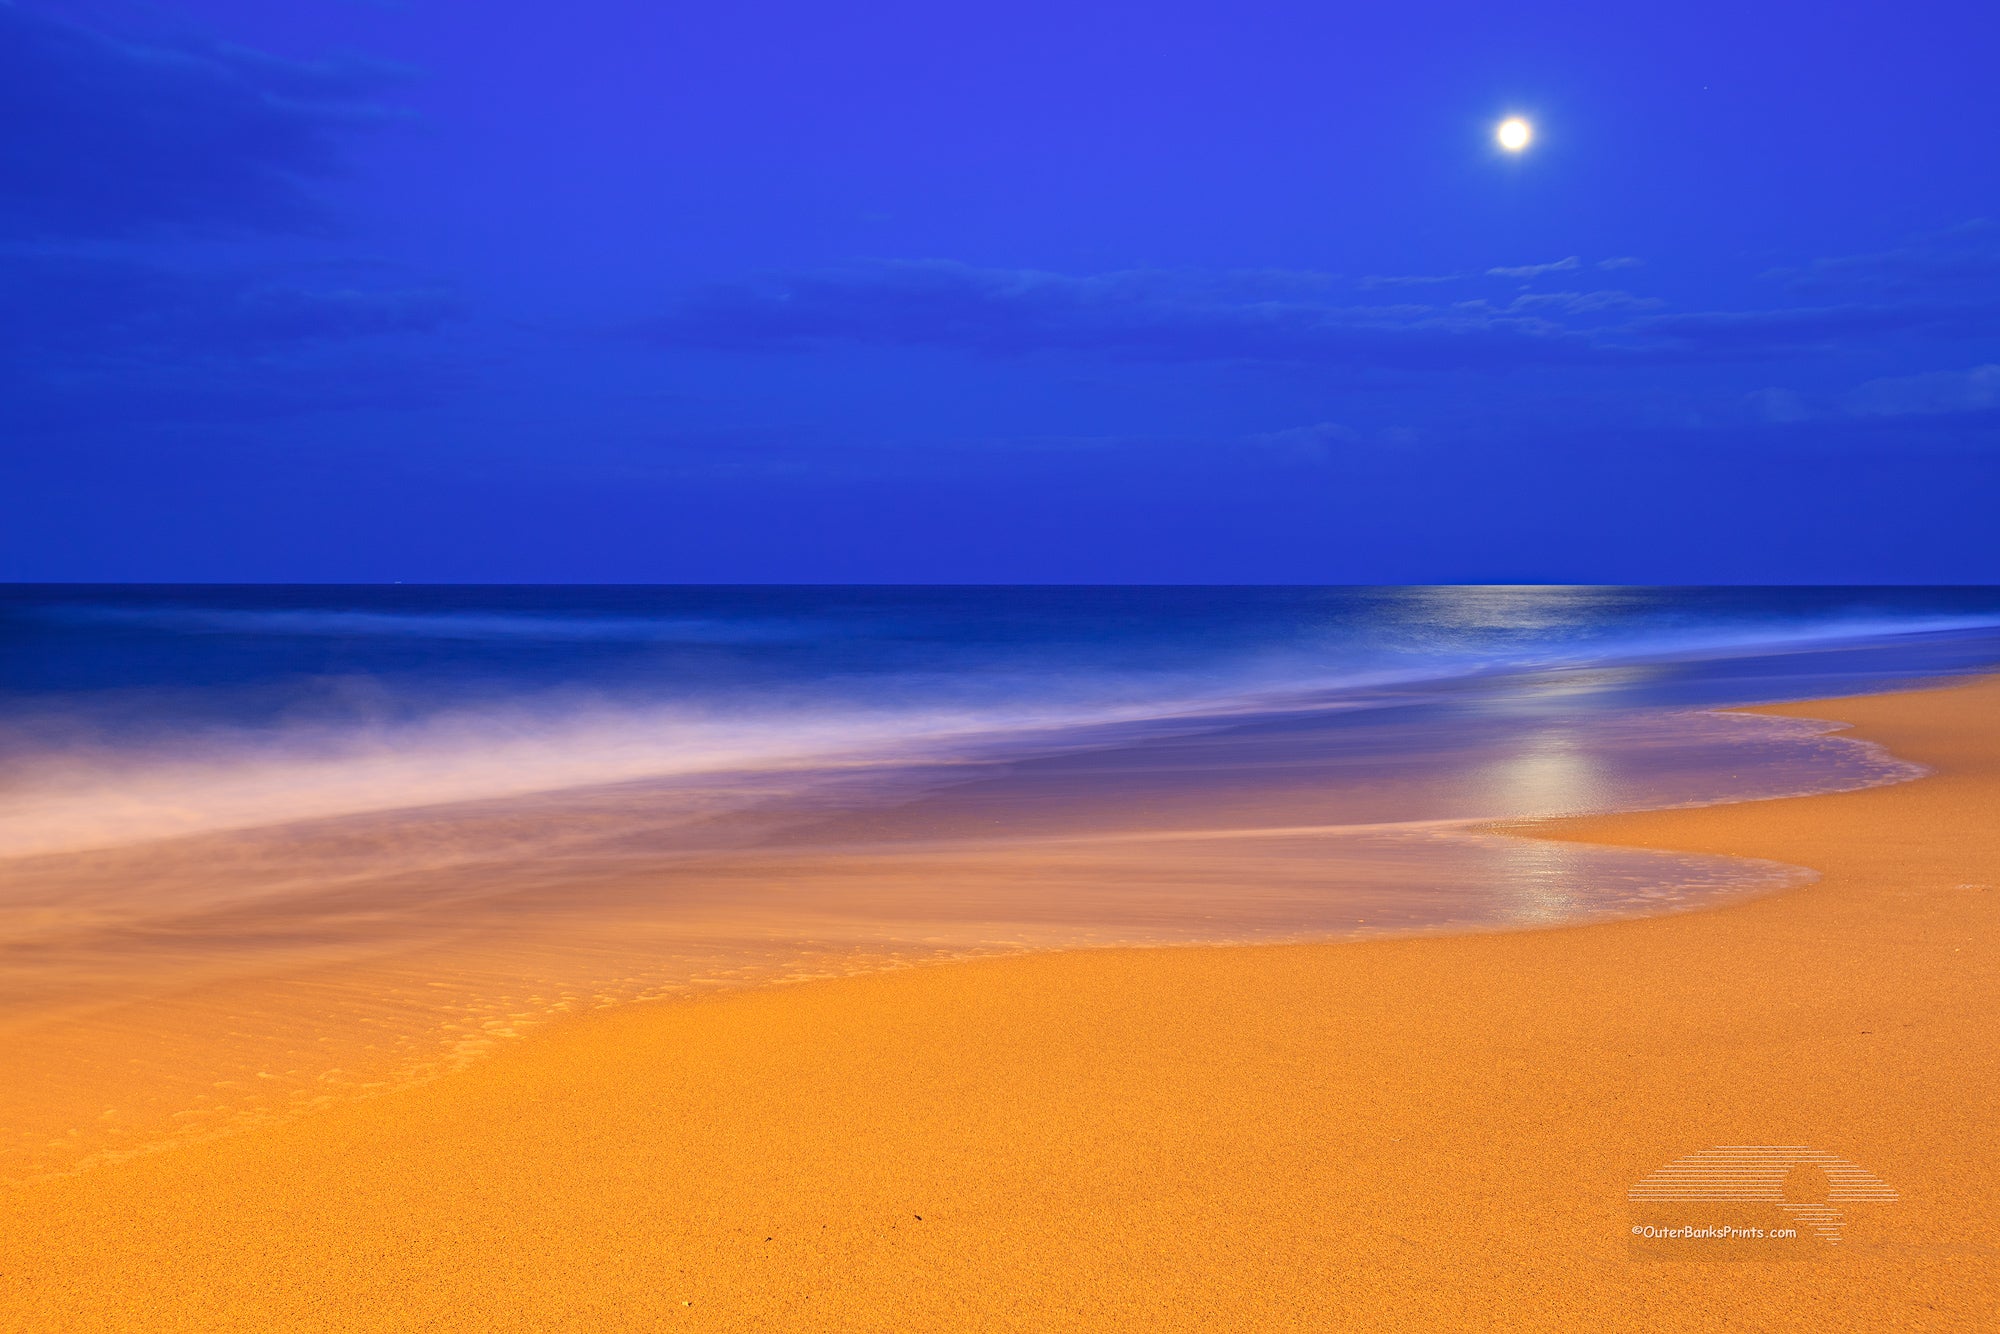 These colors are pretty much how I saw  them.  The yellow on the beach is from an incandescent spotlight shining from Kitty Hawk pier. The blue in the sky is the natural twilight color. I had to use a long exposure to gather enough light. The waves became very soft as they moved during the exposure.